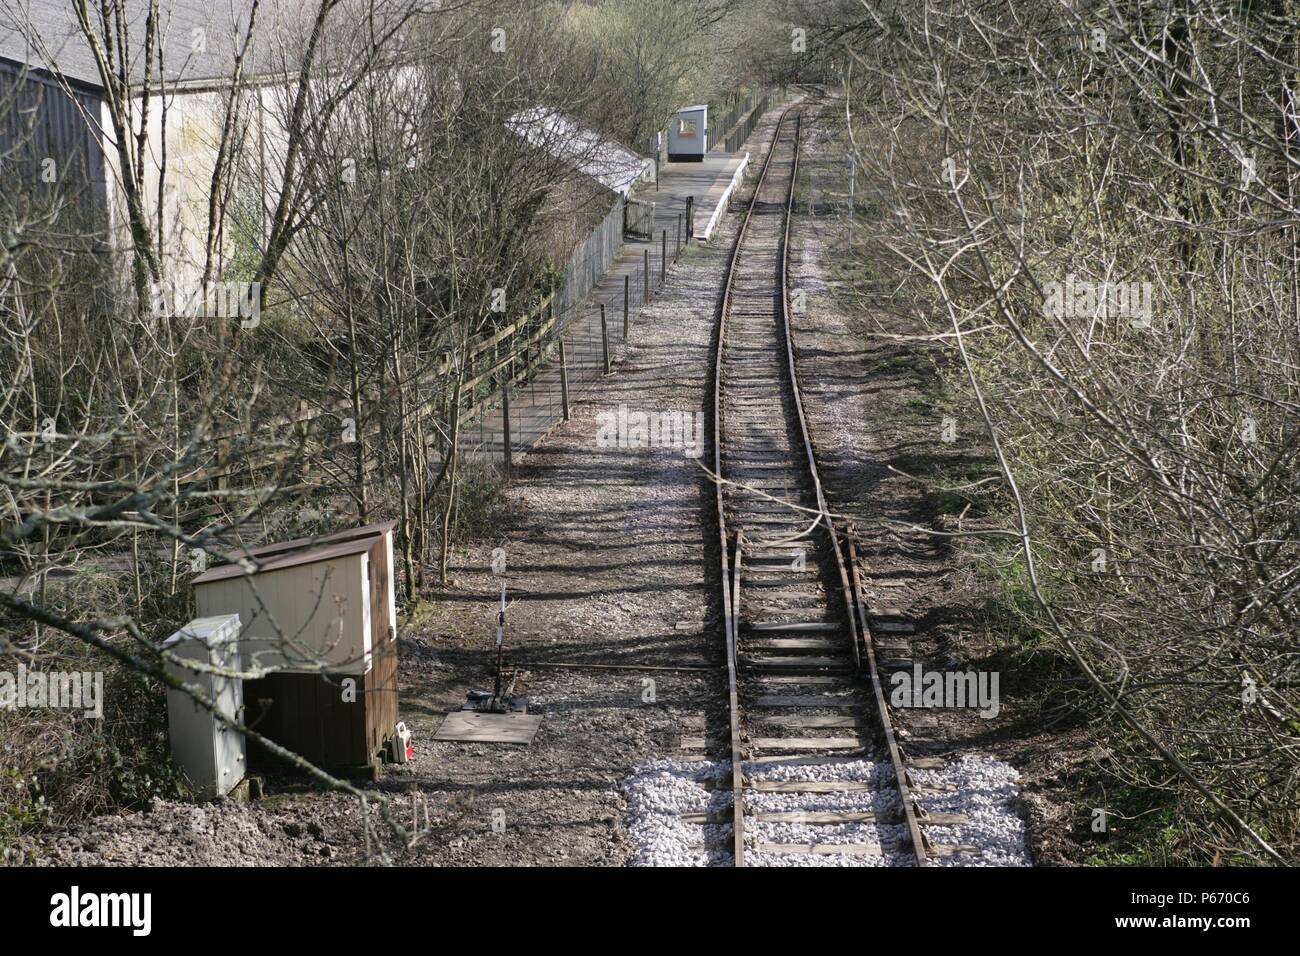 The disused gound frame at Coombe station on the Liskeard to Looe branch line, Cornwall, with the station in the background. 2006 Stock Photo